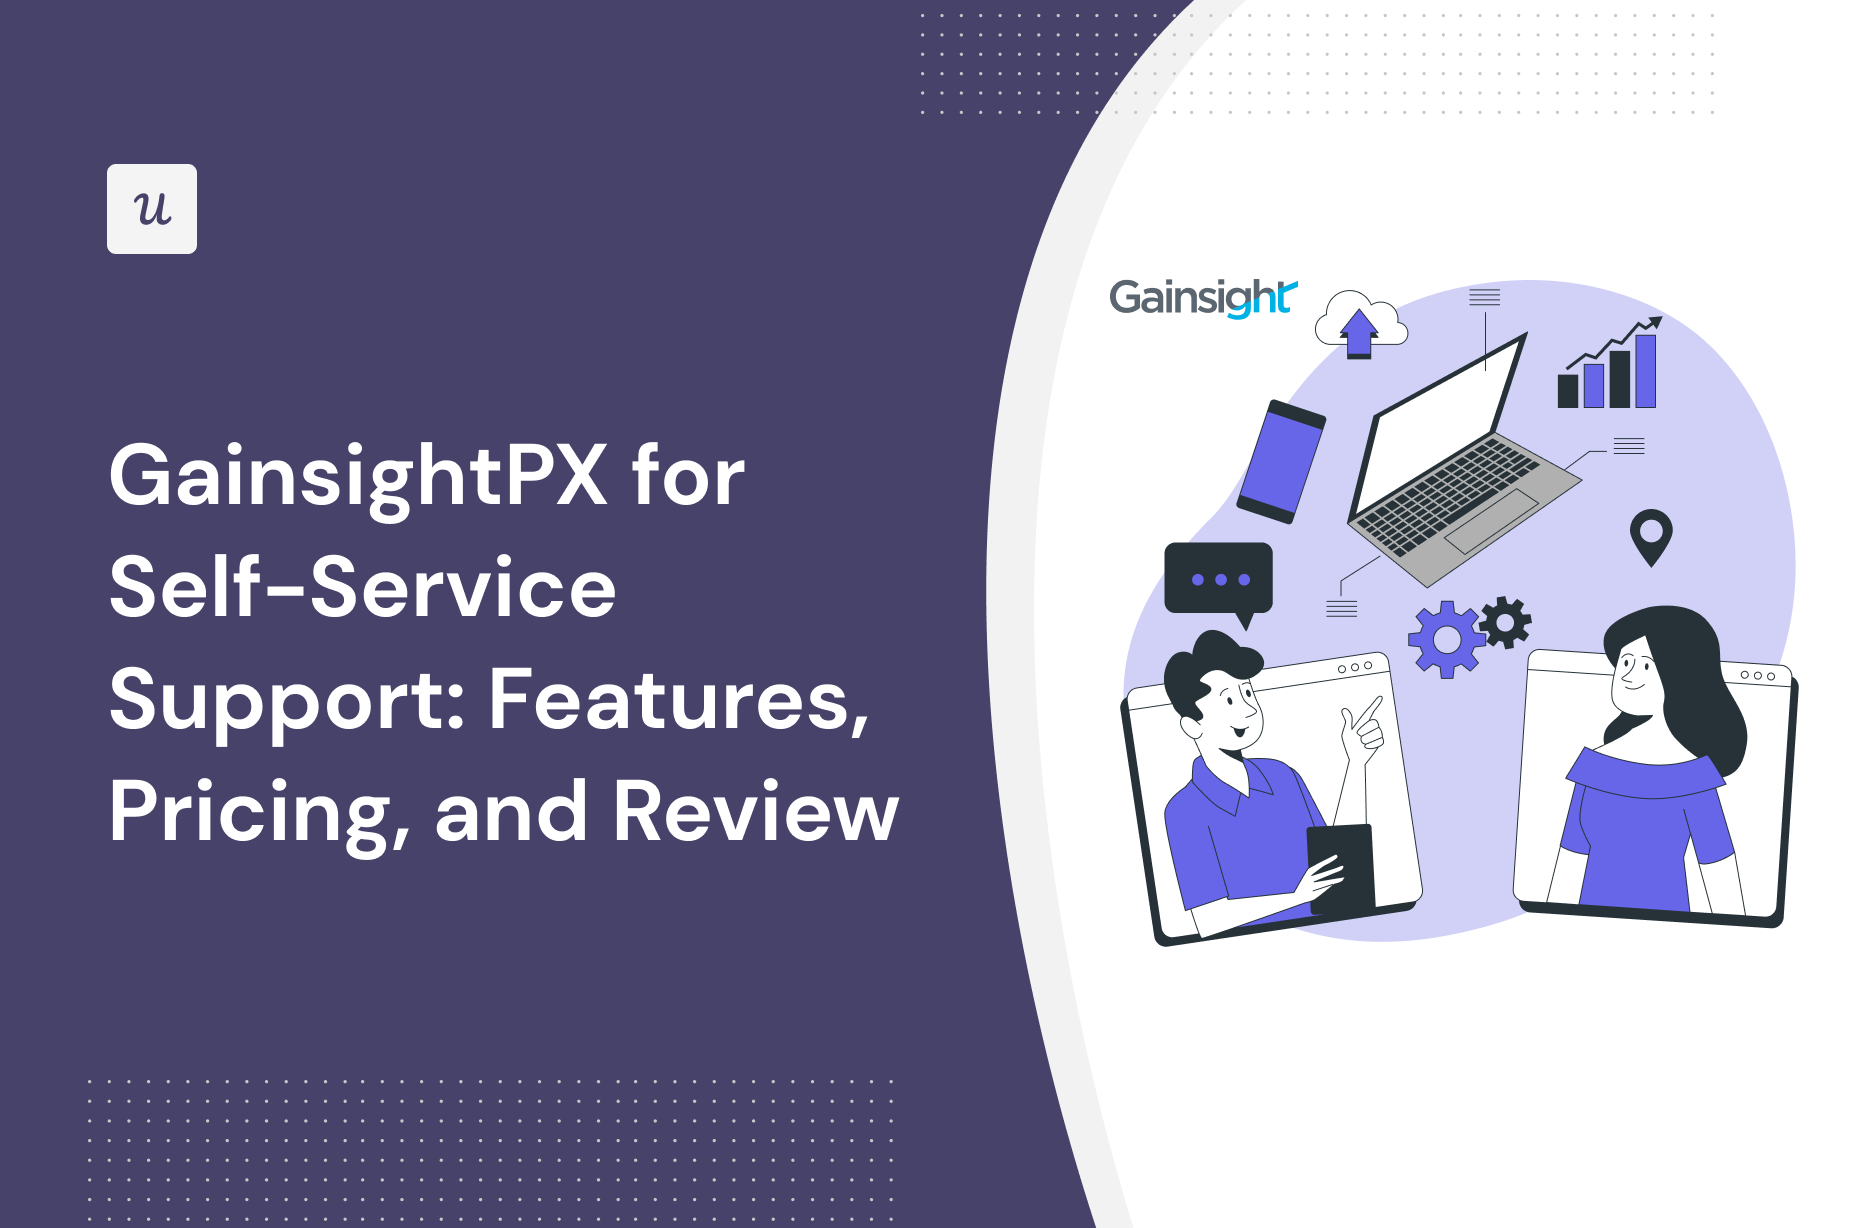 GainsightPX for Self-Service Support: Features, Pricing, and Review